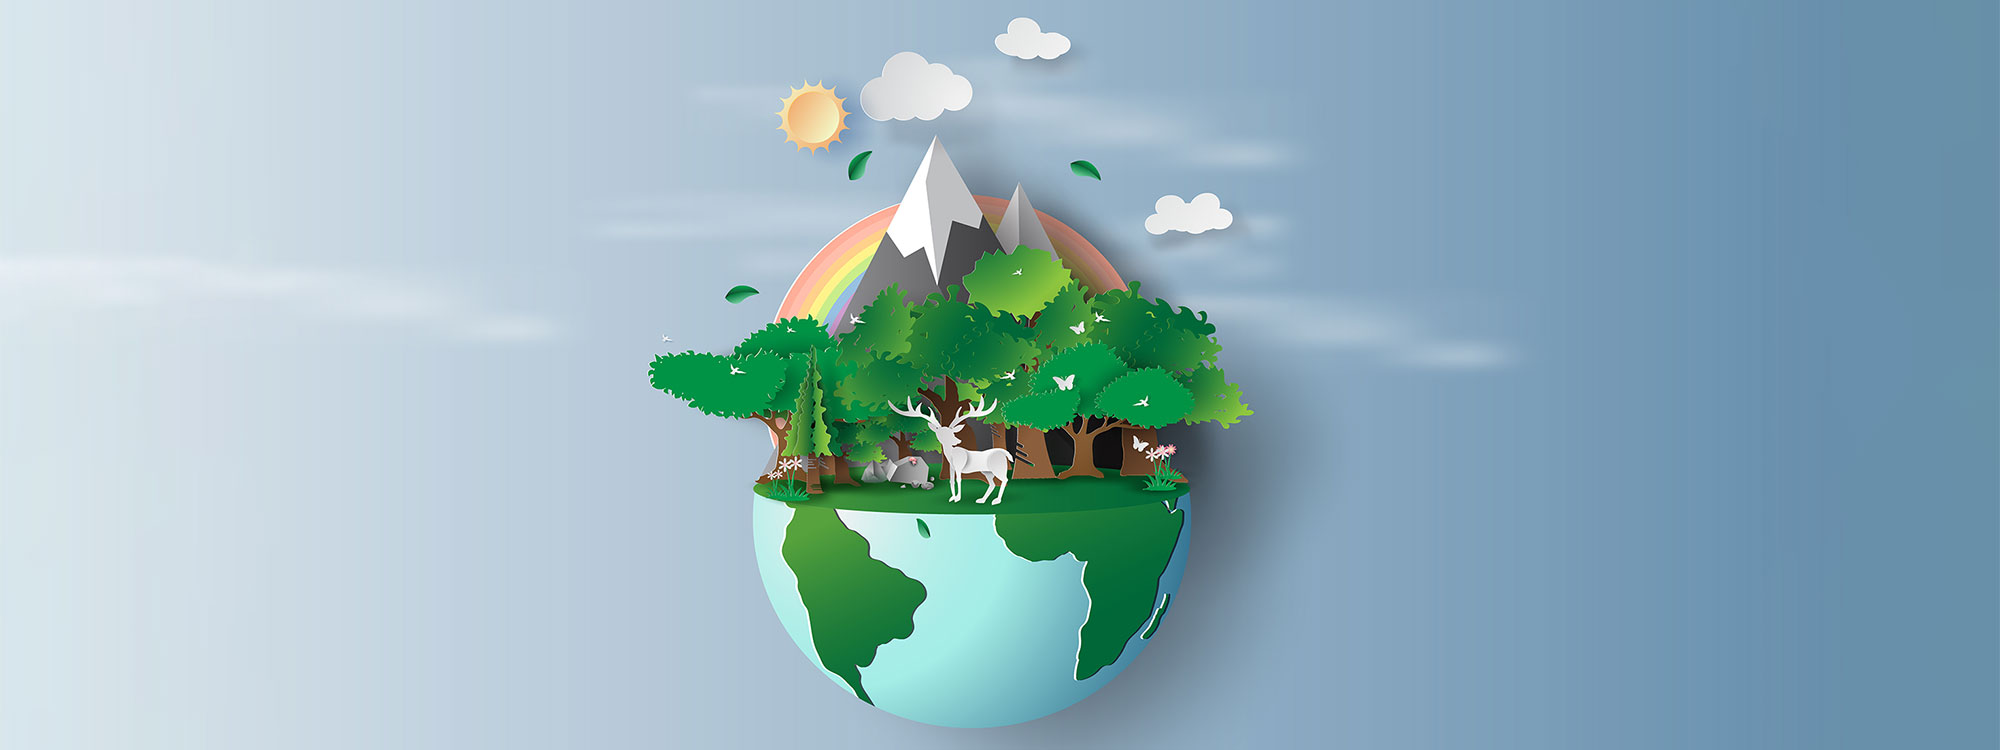 Illustration of a globe with a scenic background.